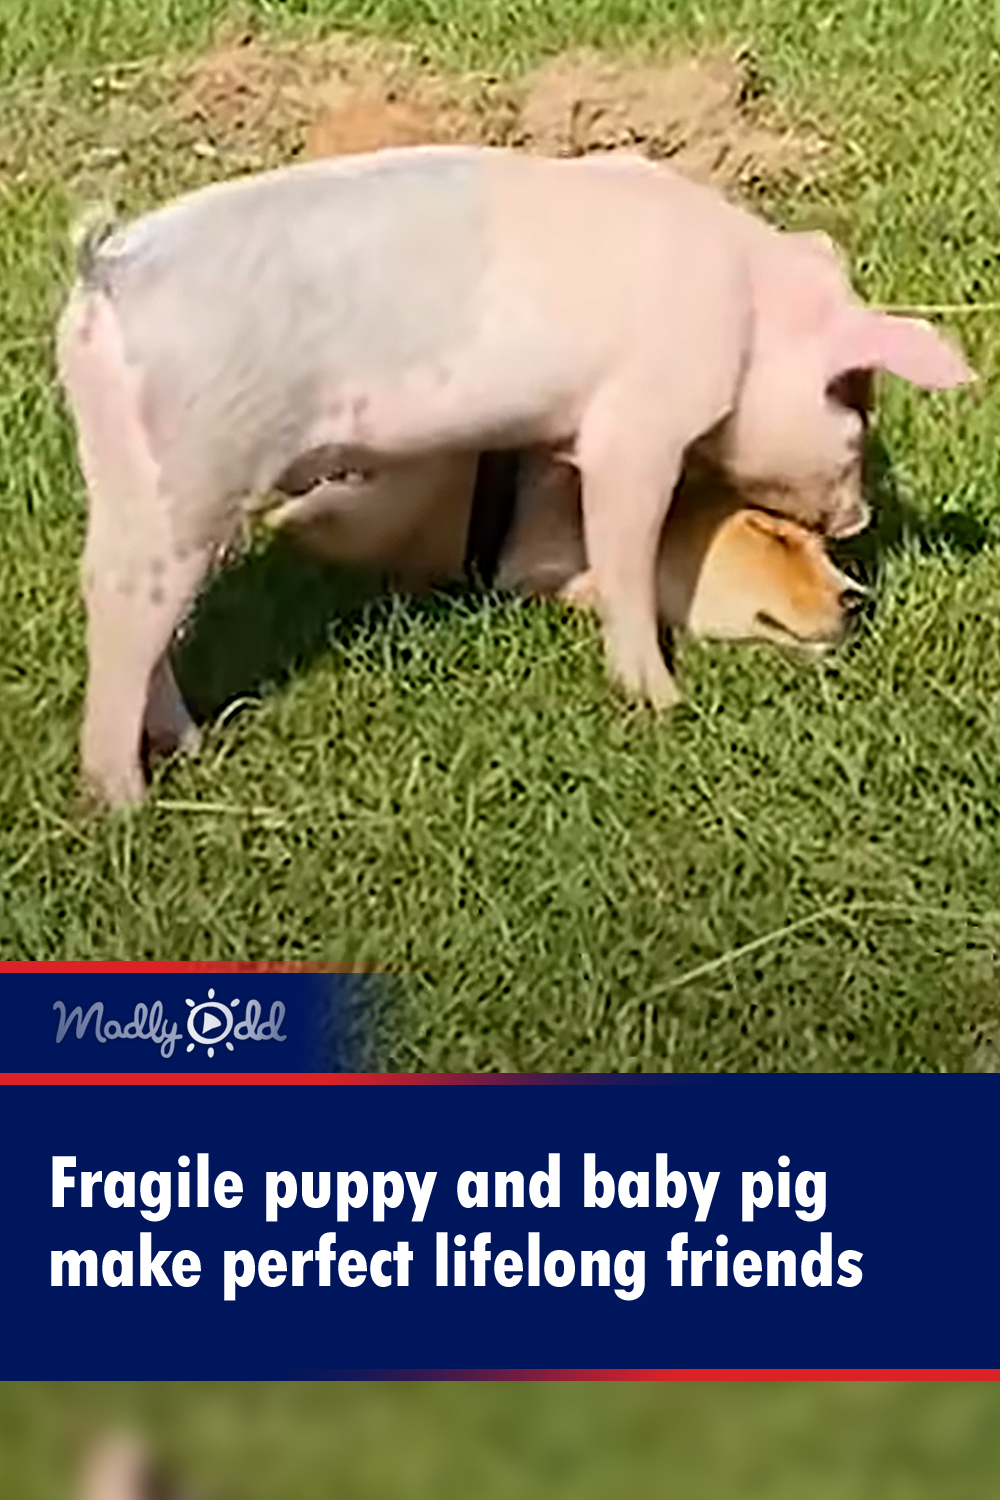 Fragile puppy and baby pig make perfect lifelong friends